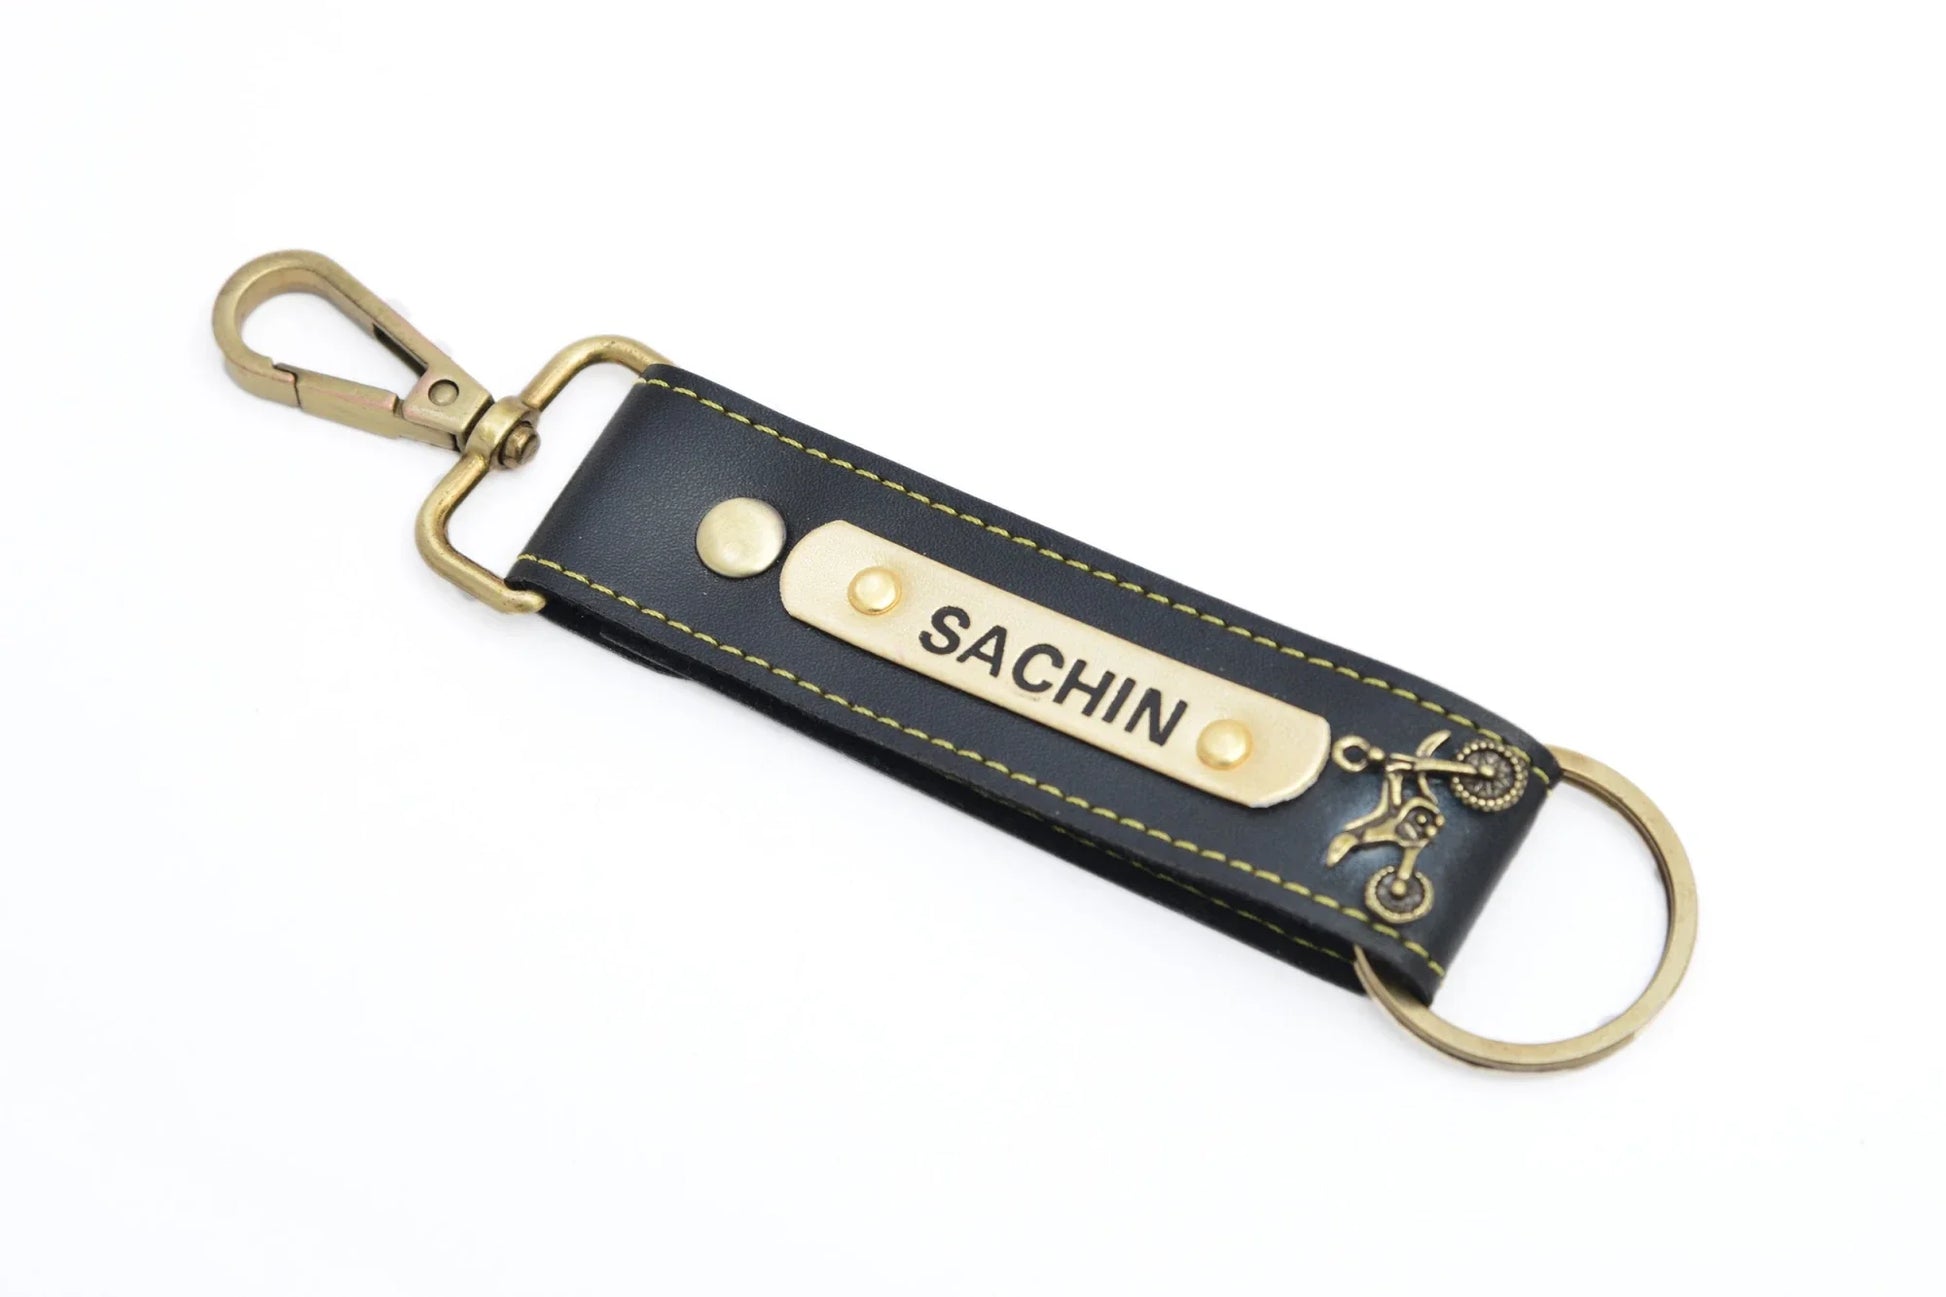 Get this premium quality leather keychain and upgrade your accessories 